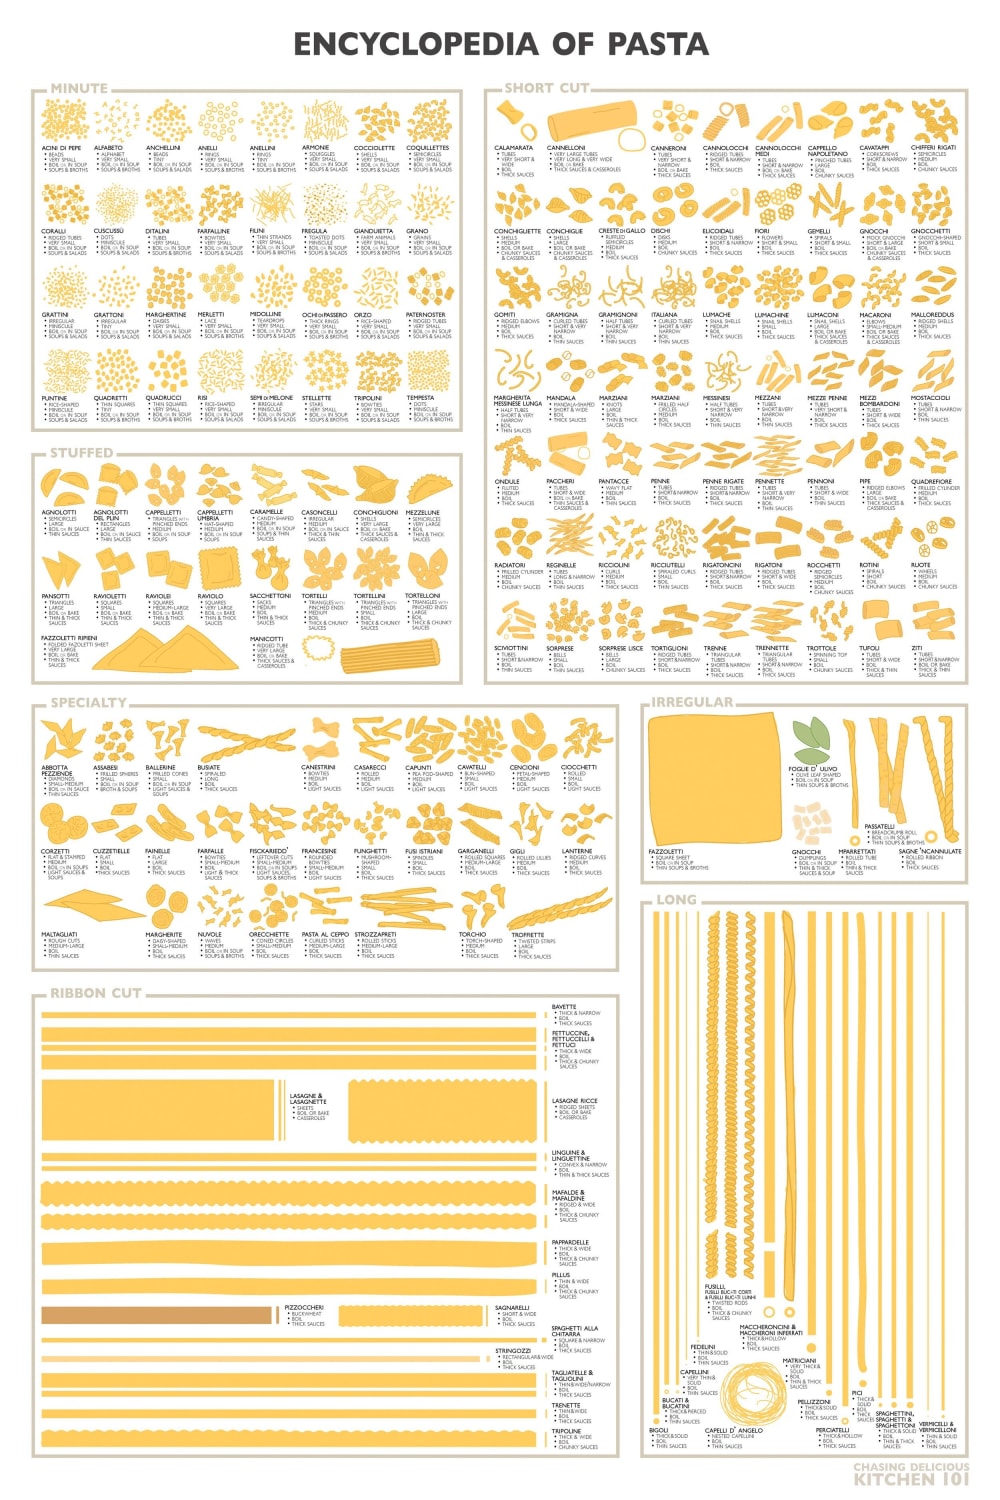 An encyclopaedia of (almost) all pasta shapes!